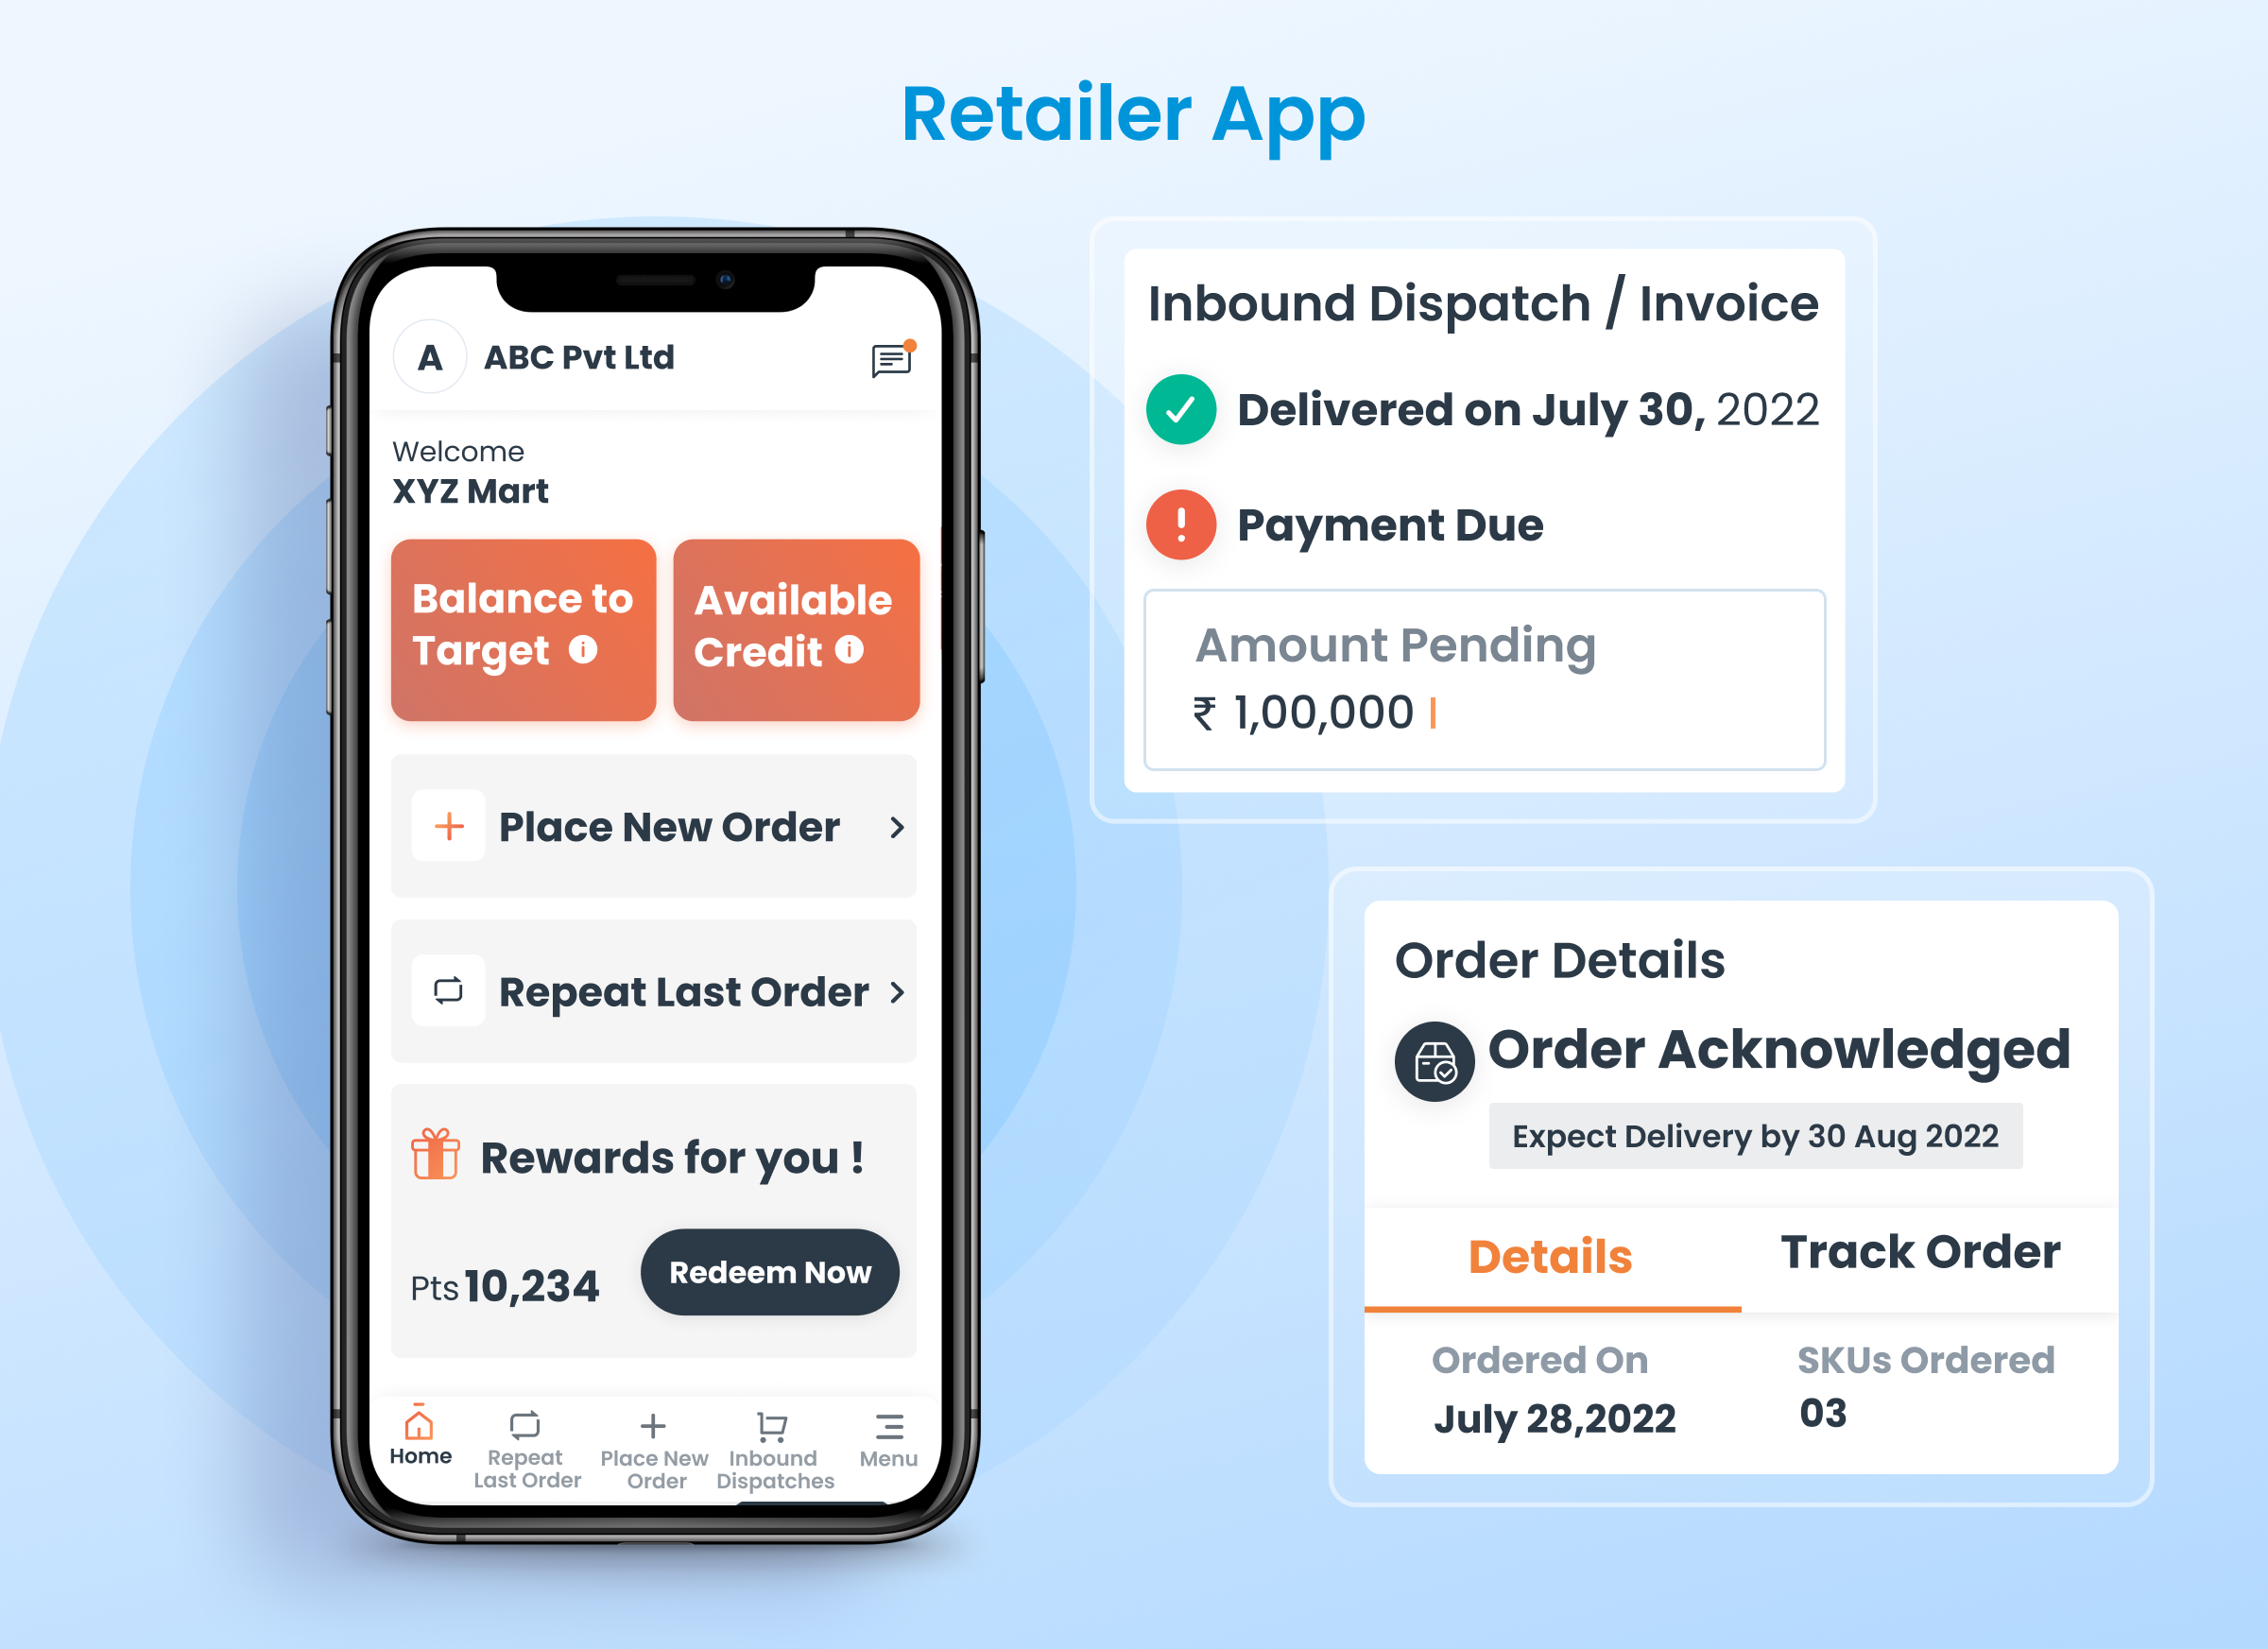 Our retailer app enables retailers to place and track orders, giving them greater freedom and assistance.